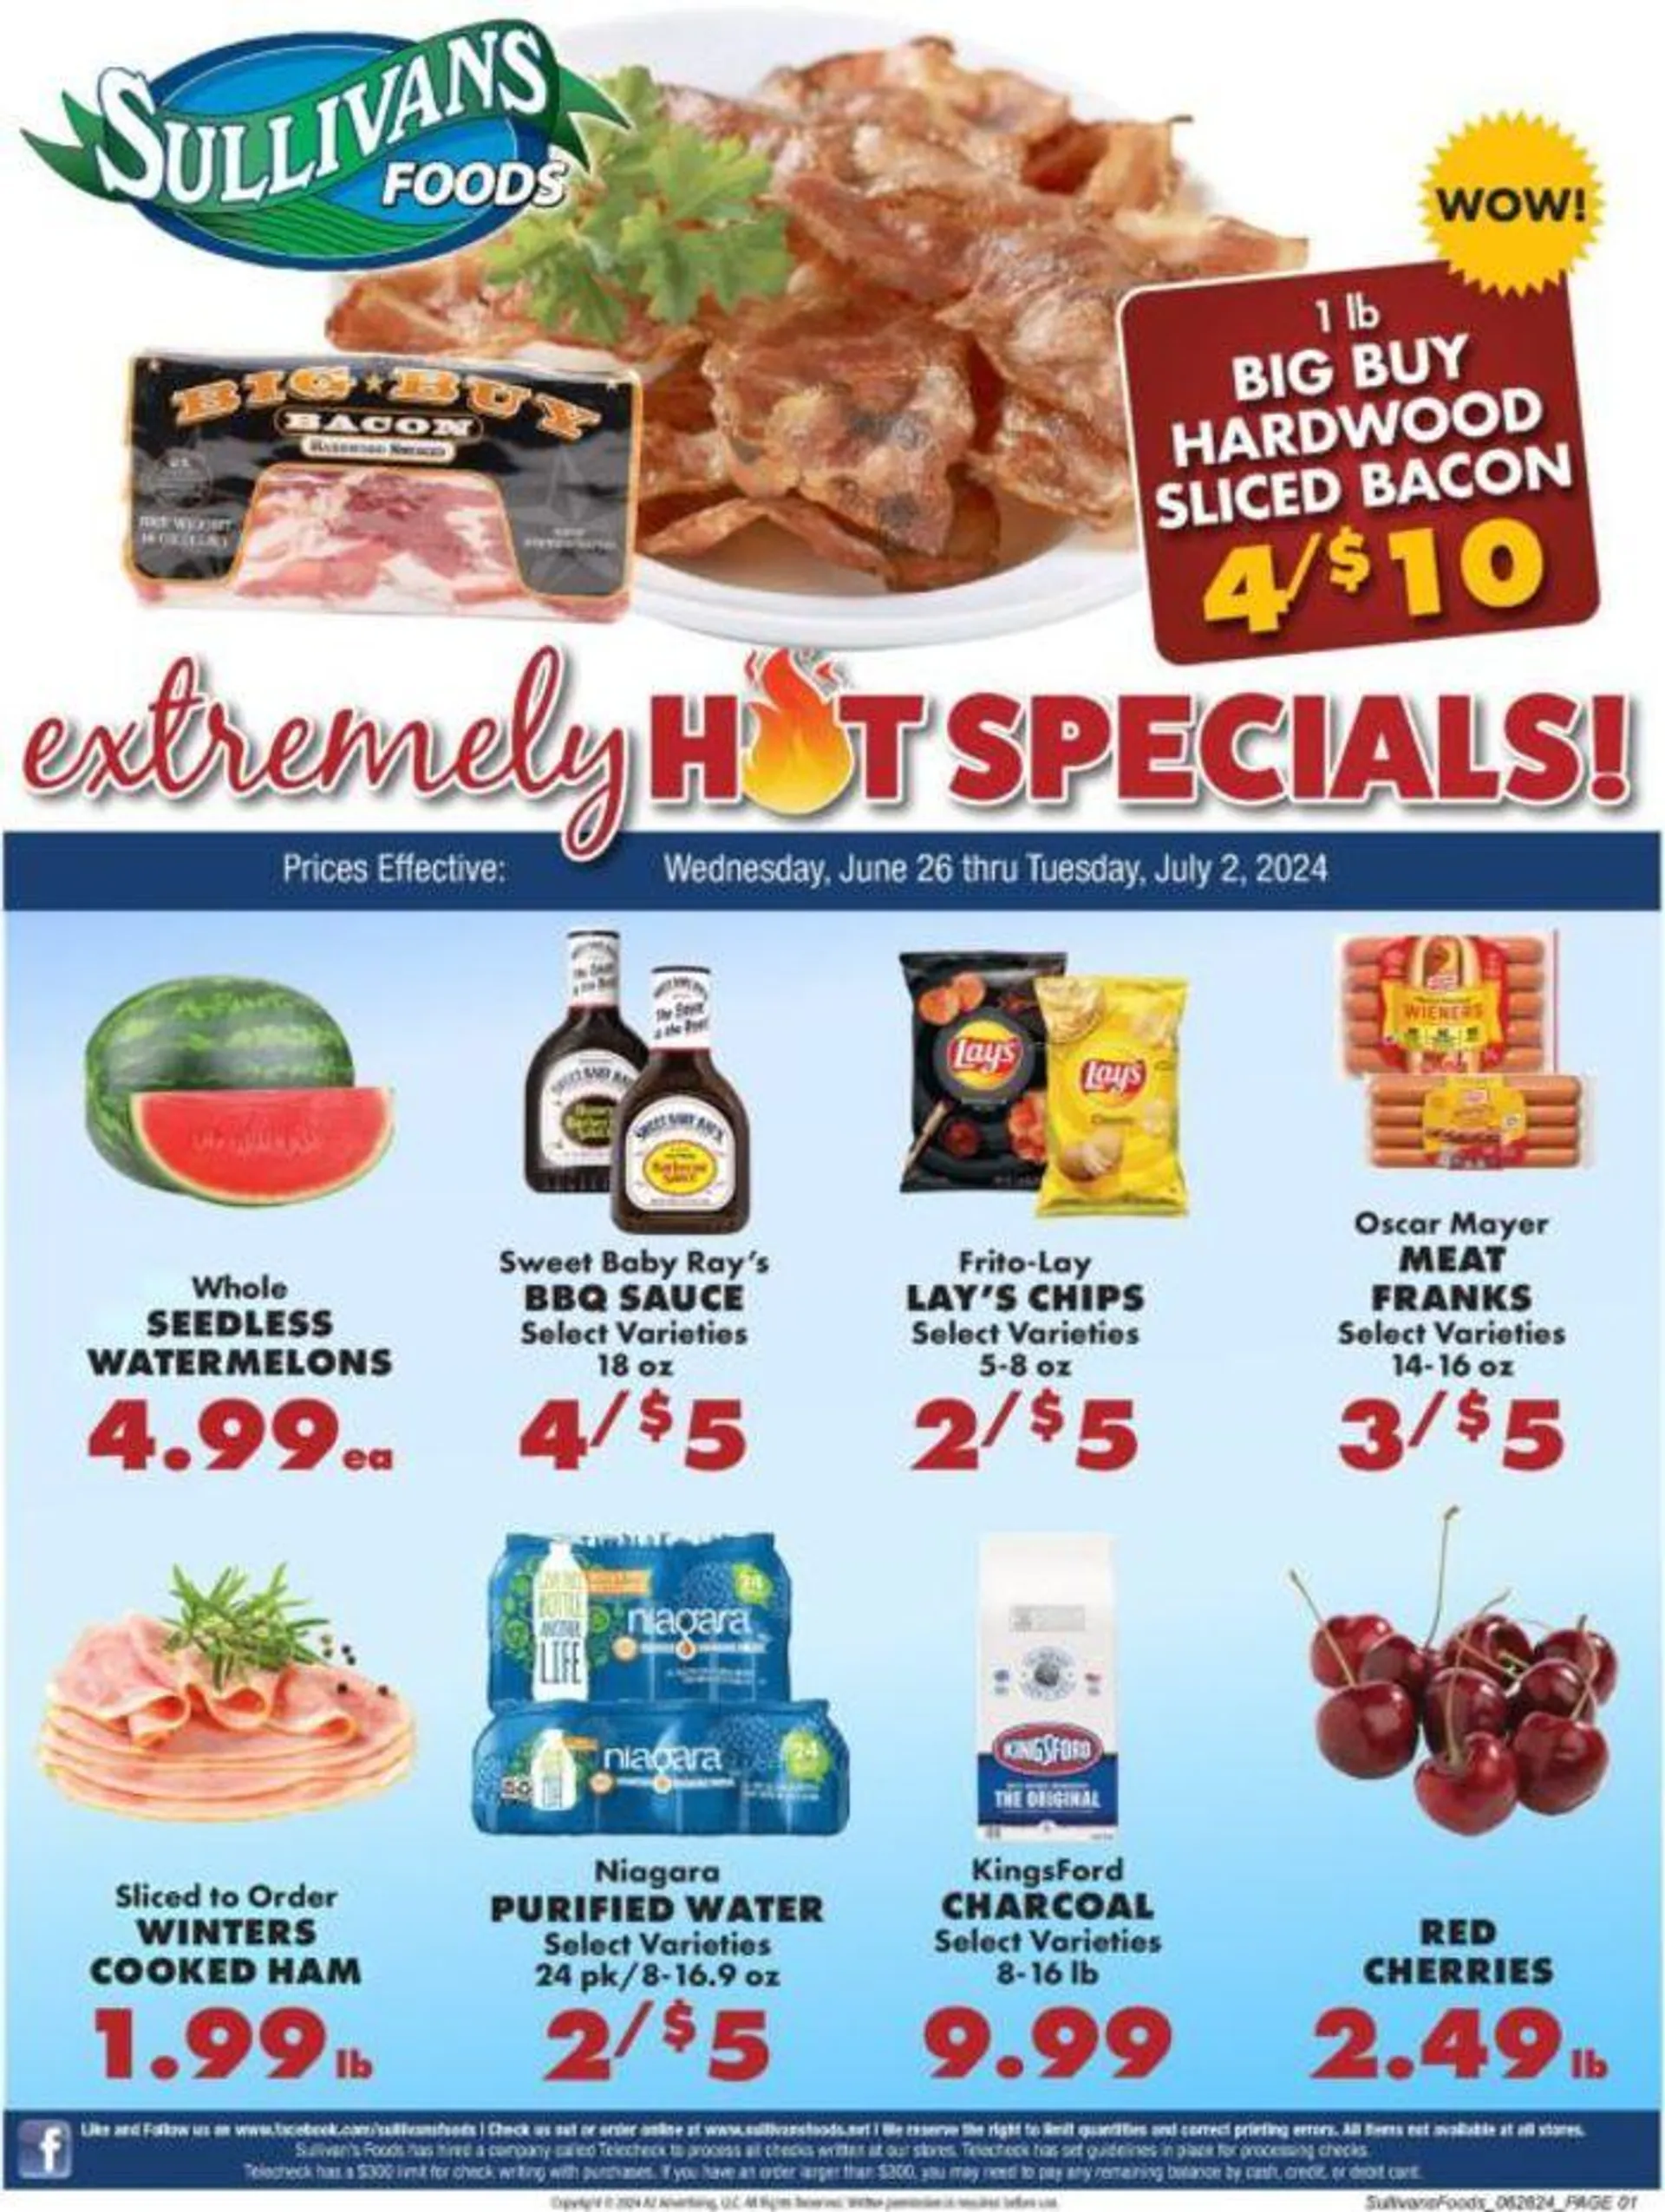 Extremely Hot Specials - 1